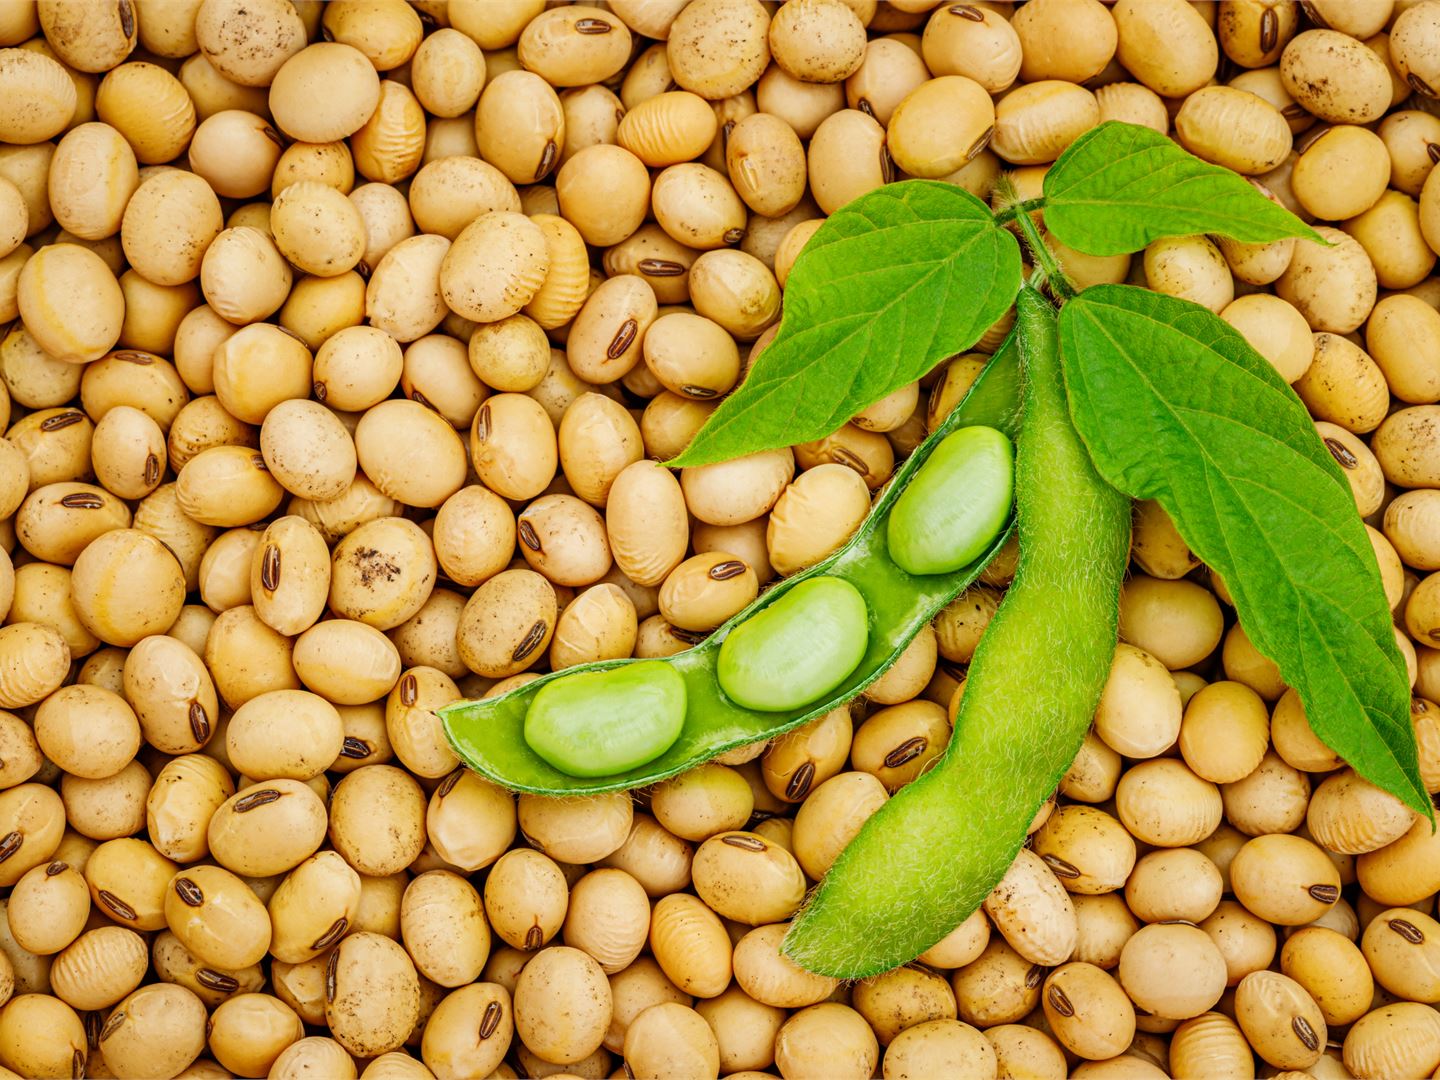 Raw material policy: Soy